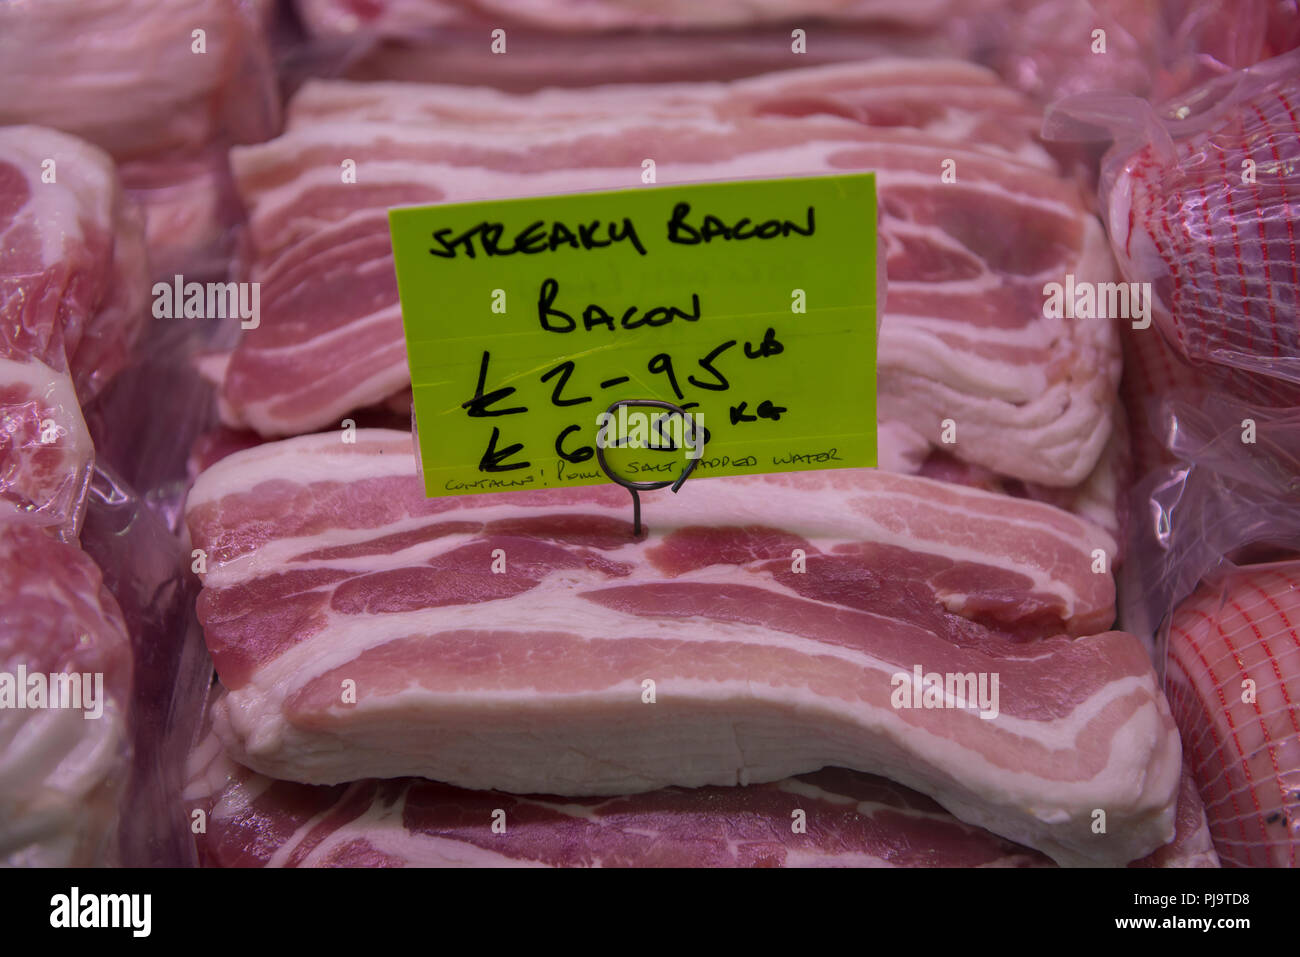 Bacon on sale at a butchers market. Stock Photo